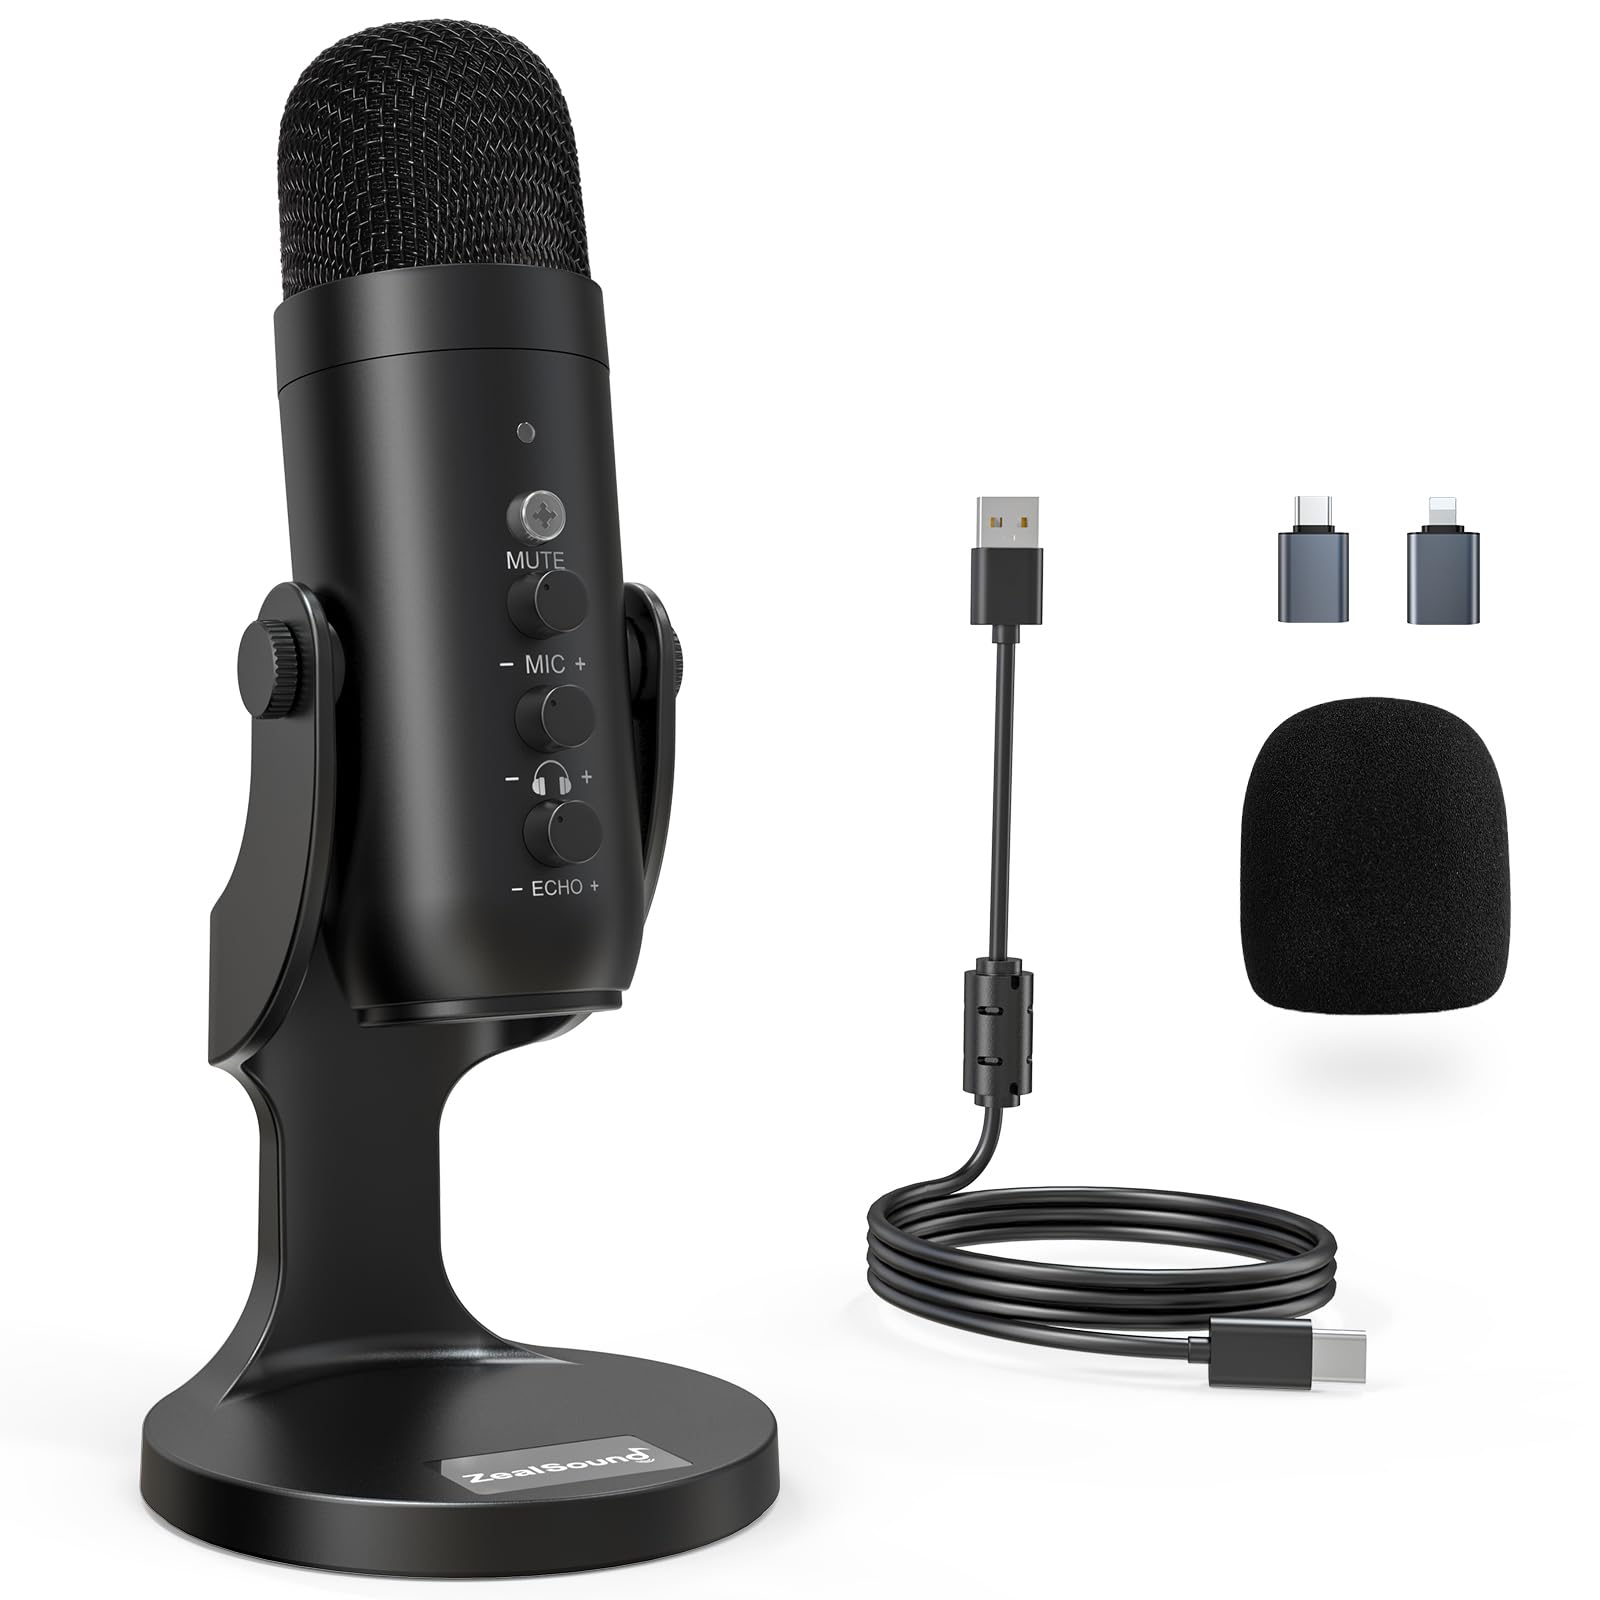 Ensure that the Blue Yeti is selected as the default input device under Input.
Adjust the input volume and test the microphone to see if it is recognized.